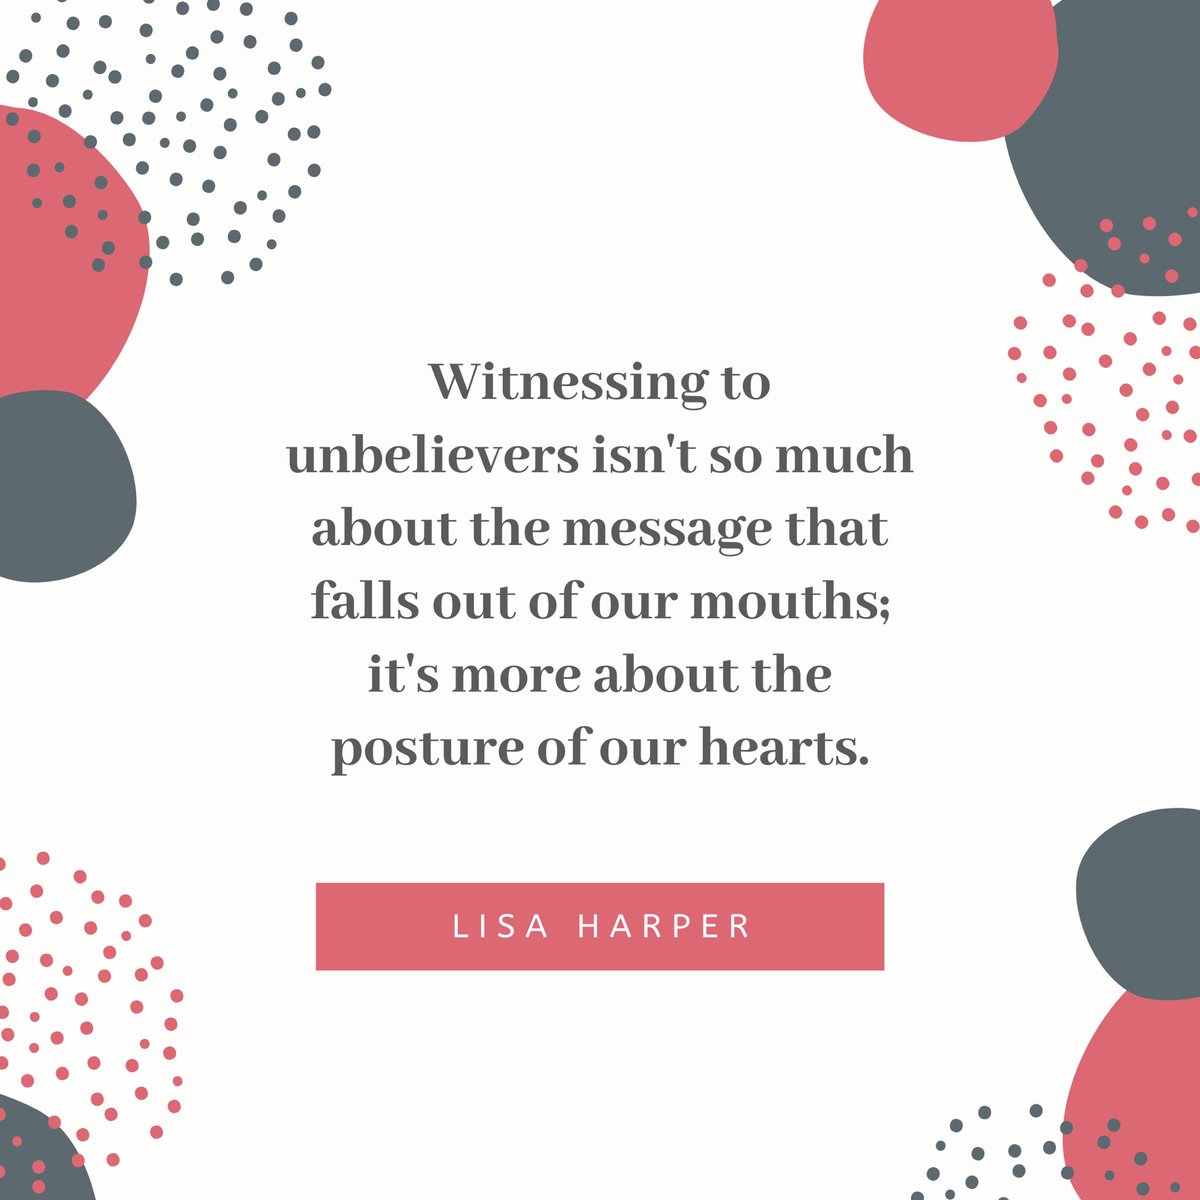 What’s the posture of your heart?